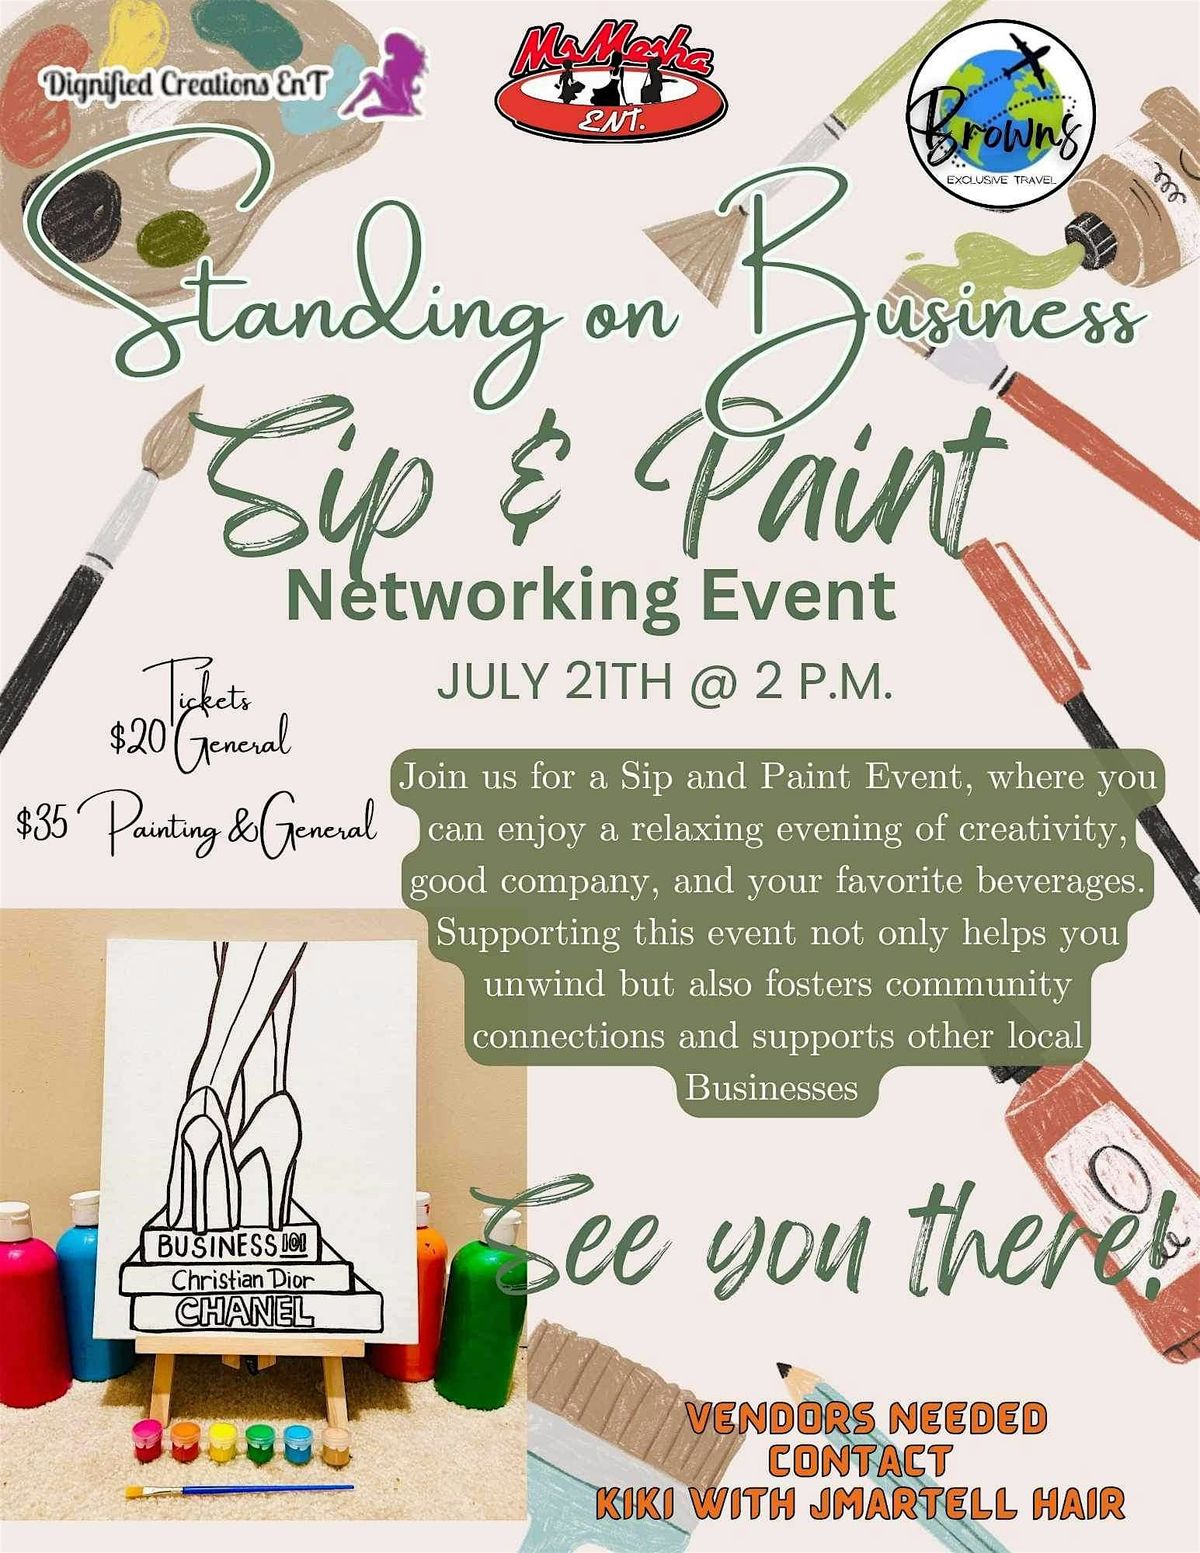 Standing on Business Sip & Paint Networking Event